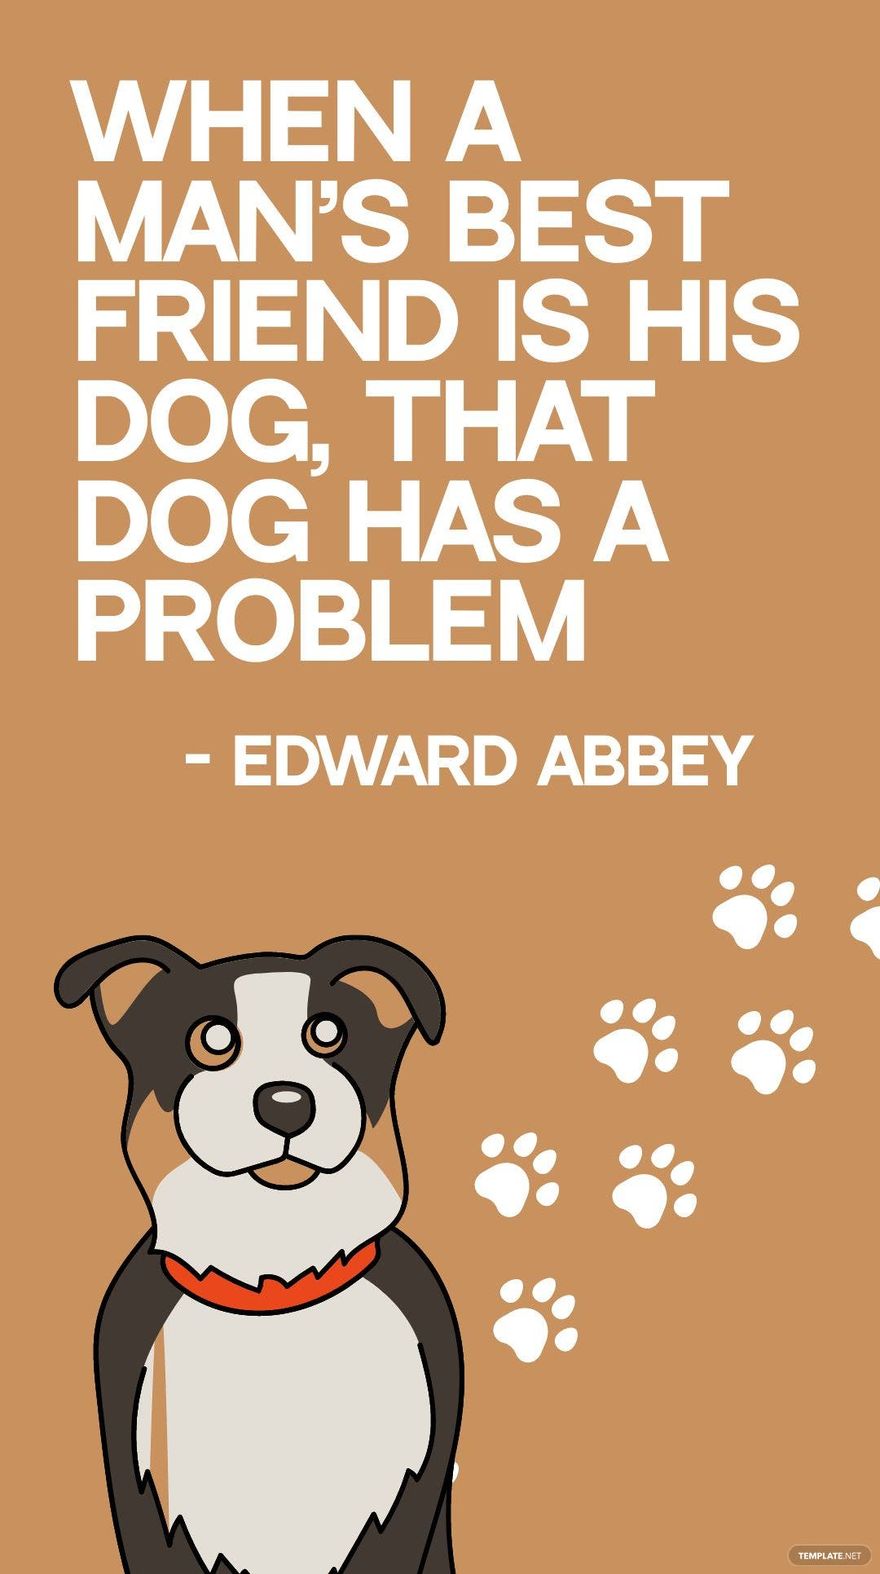 Edward Abbey - When a man's best friend is his dog, that dog has a problem